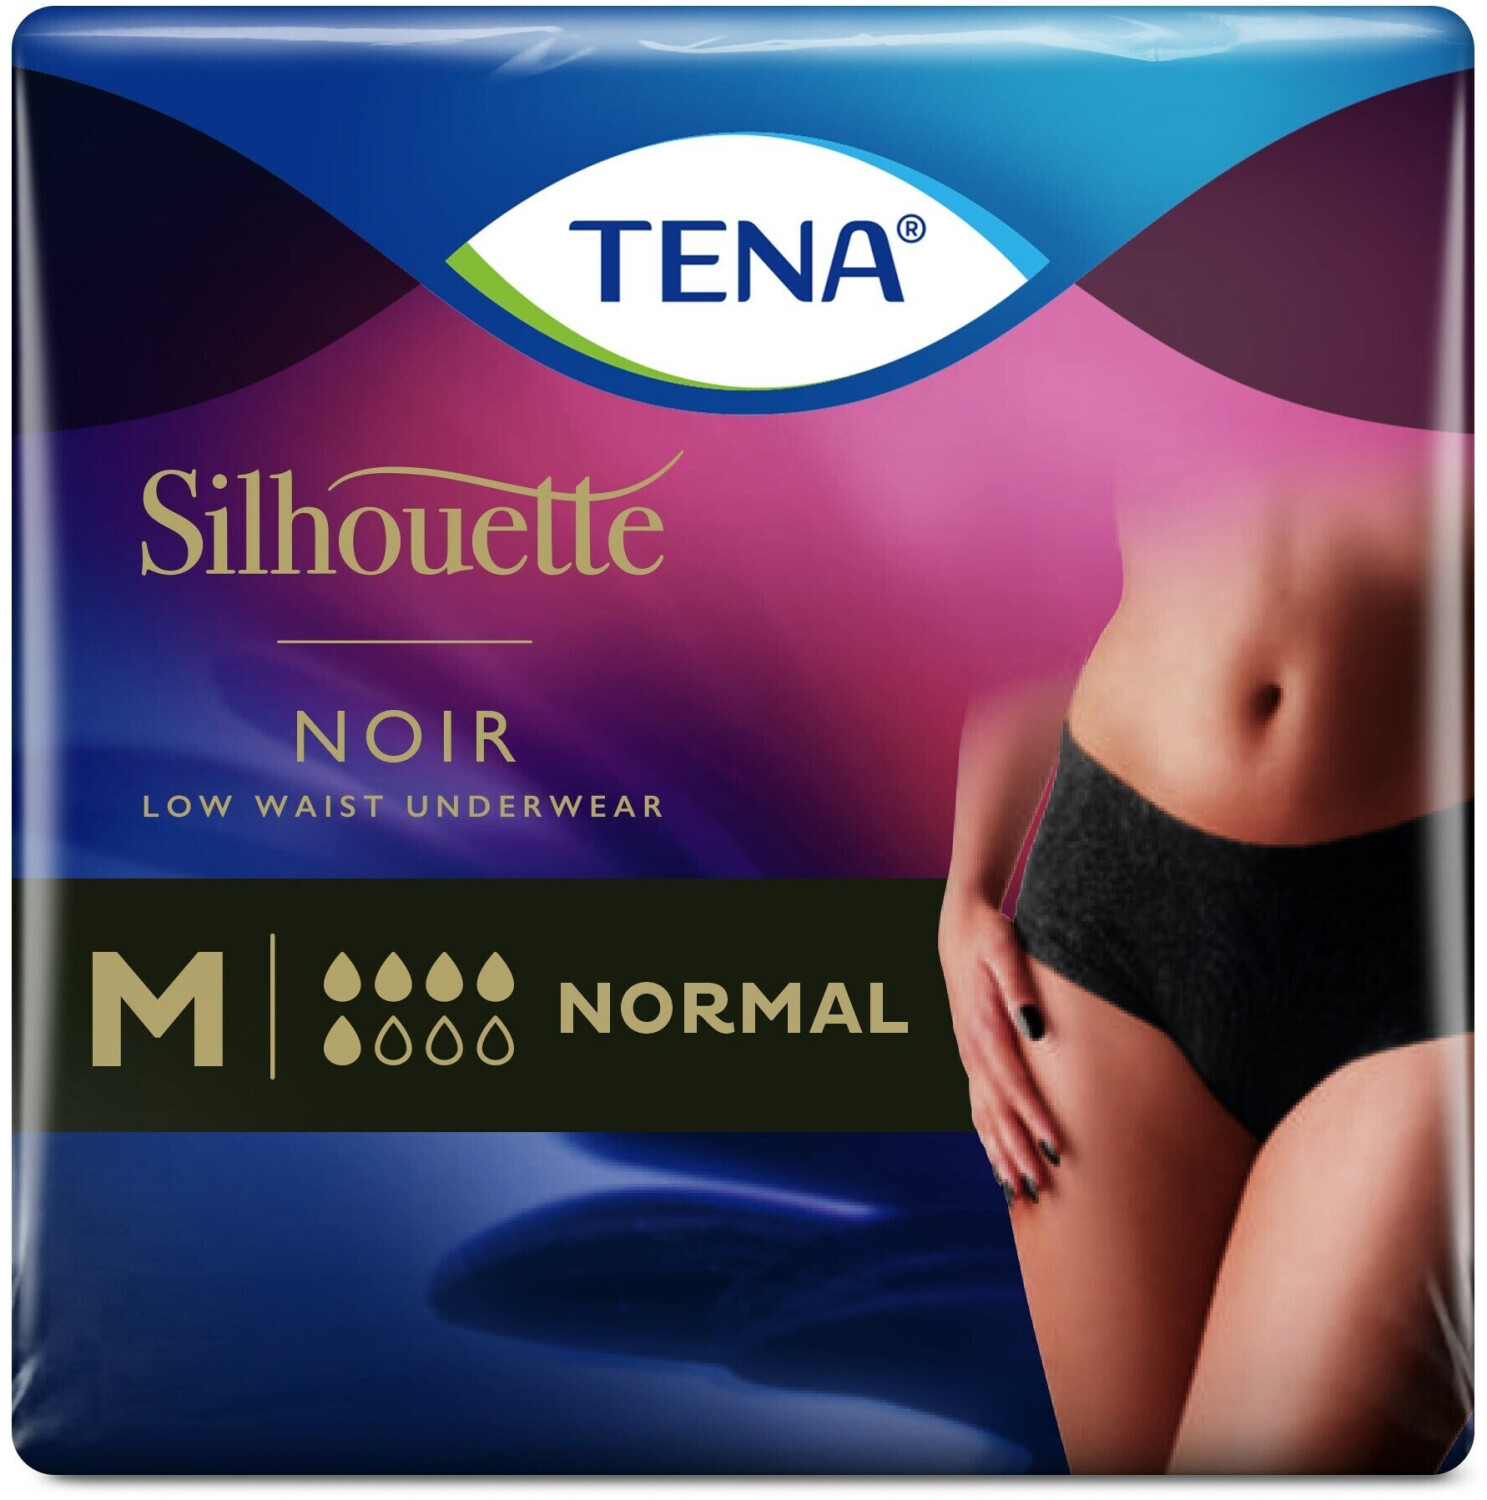 Buy Tena Silhouette Noir Slips Size M (10 pcs) from £8.50 (Today